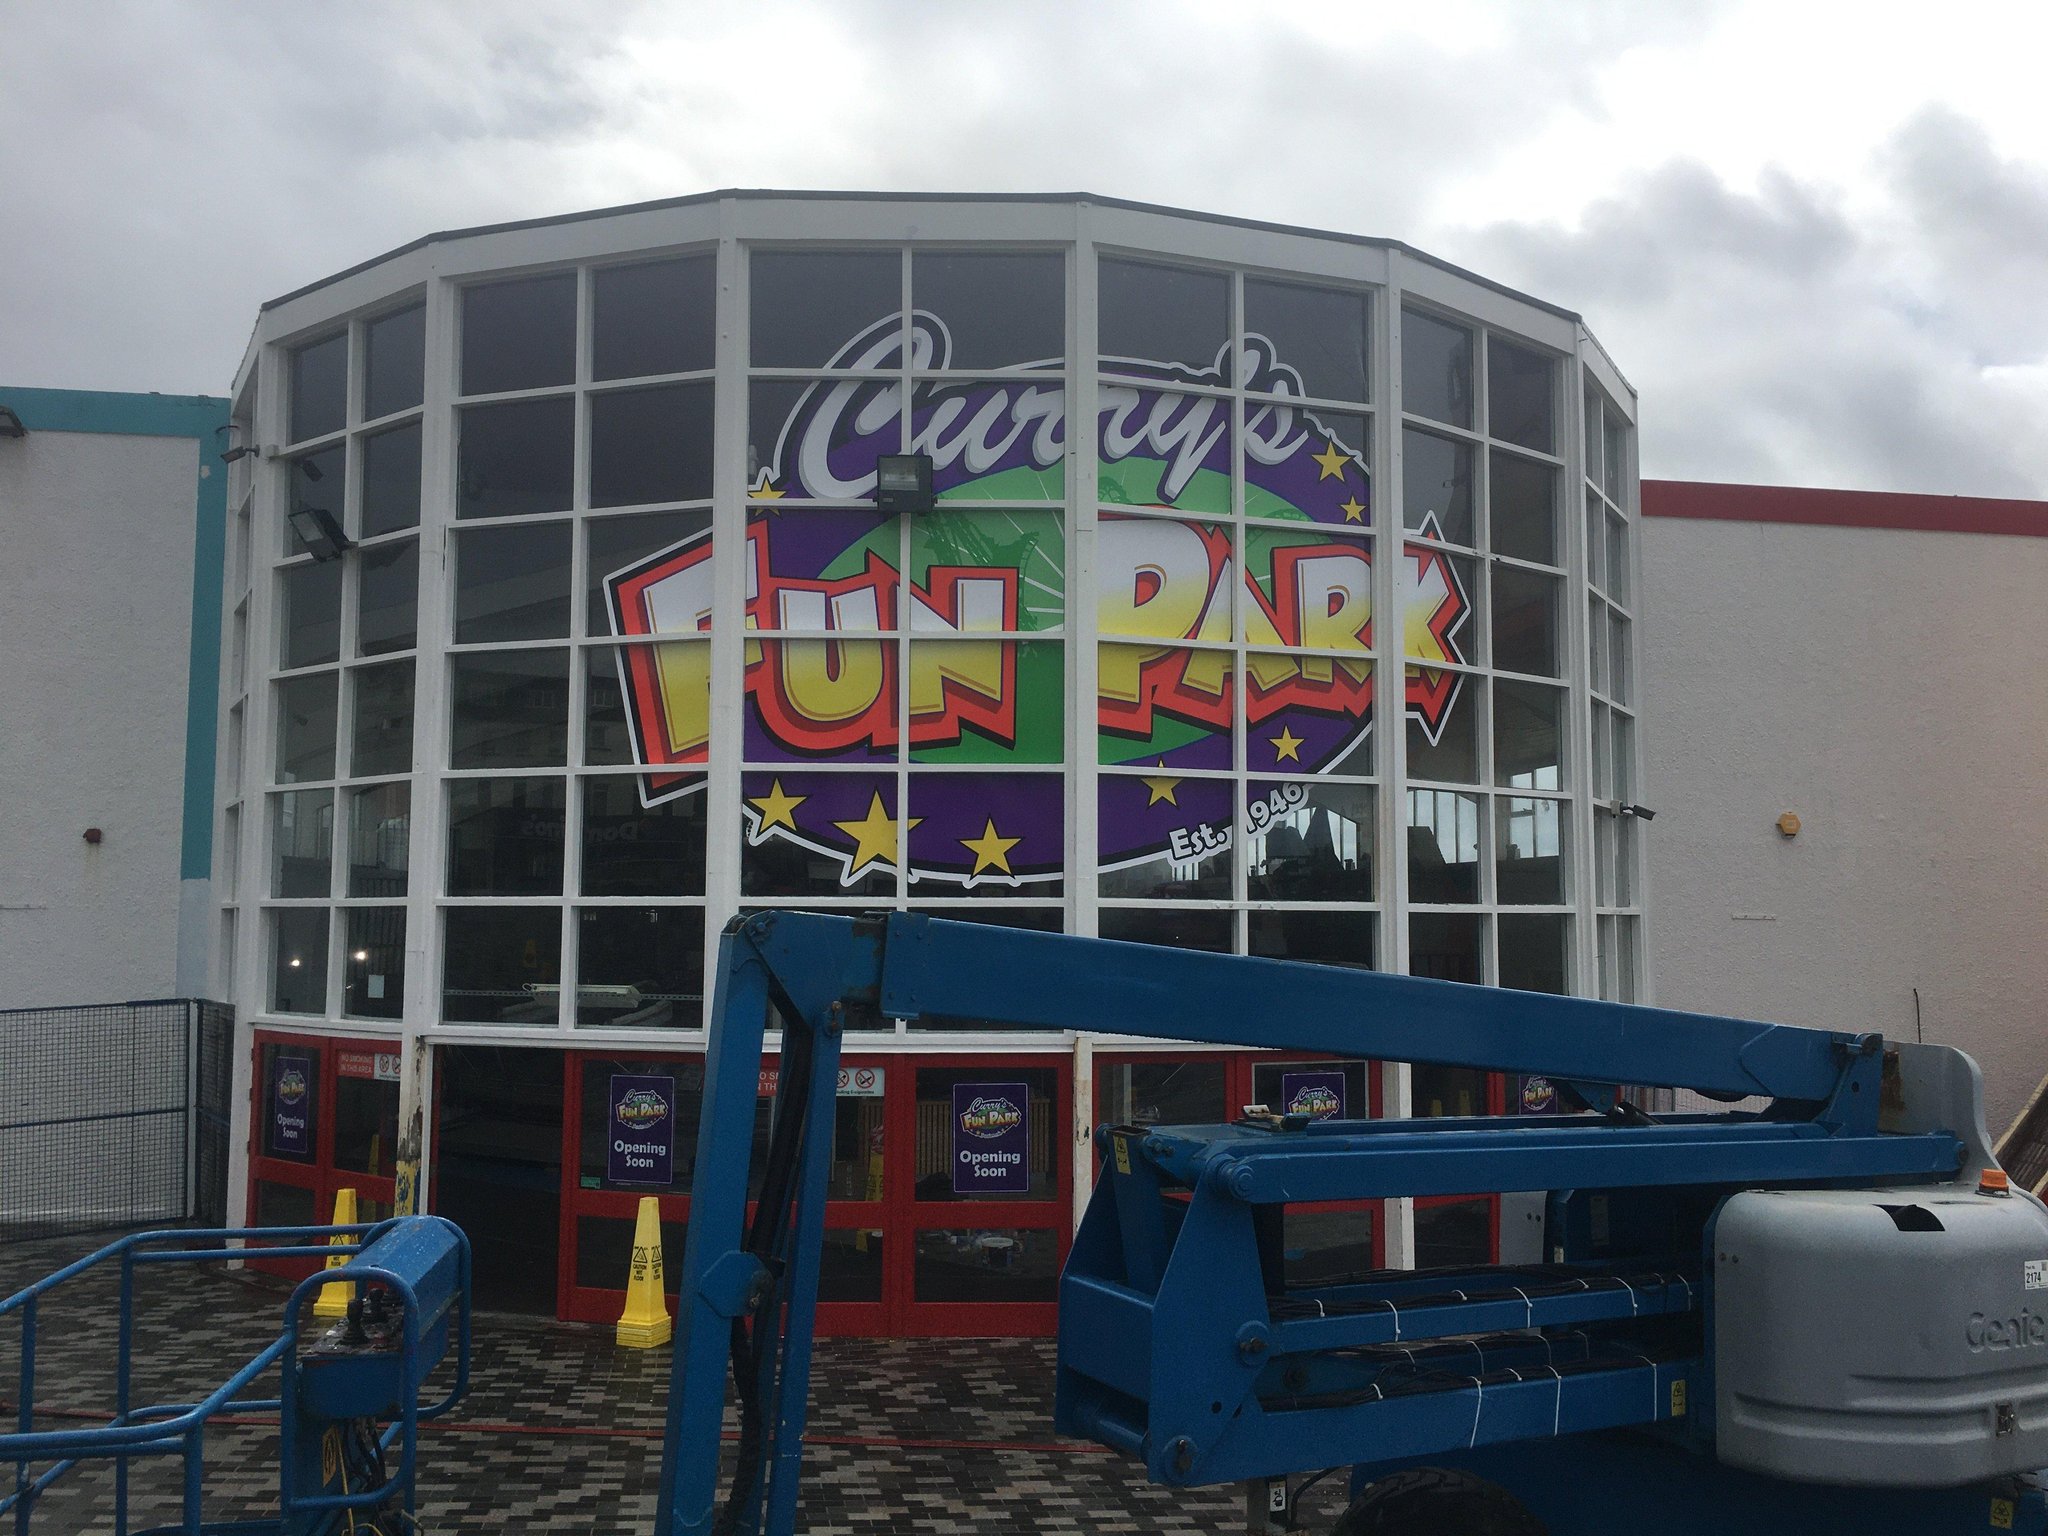 Curry's Fun Park Portrush set opening date, fingers crossed